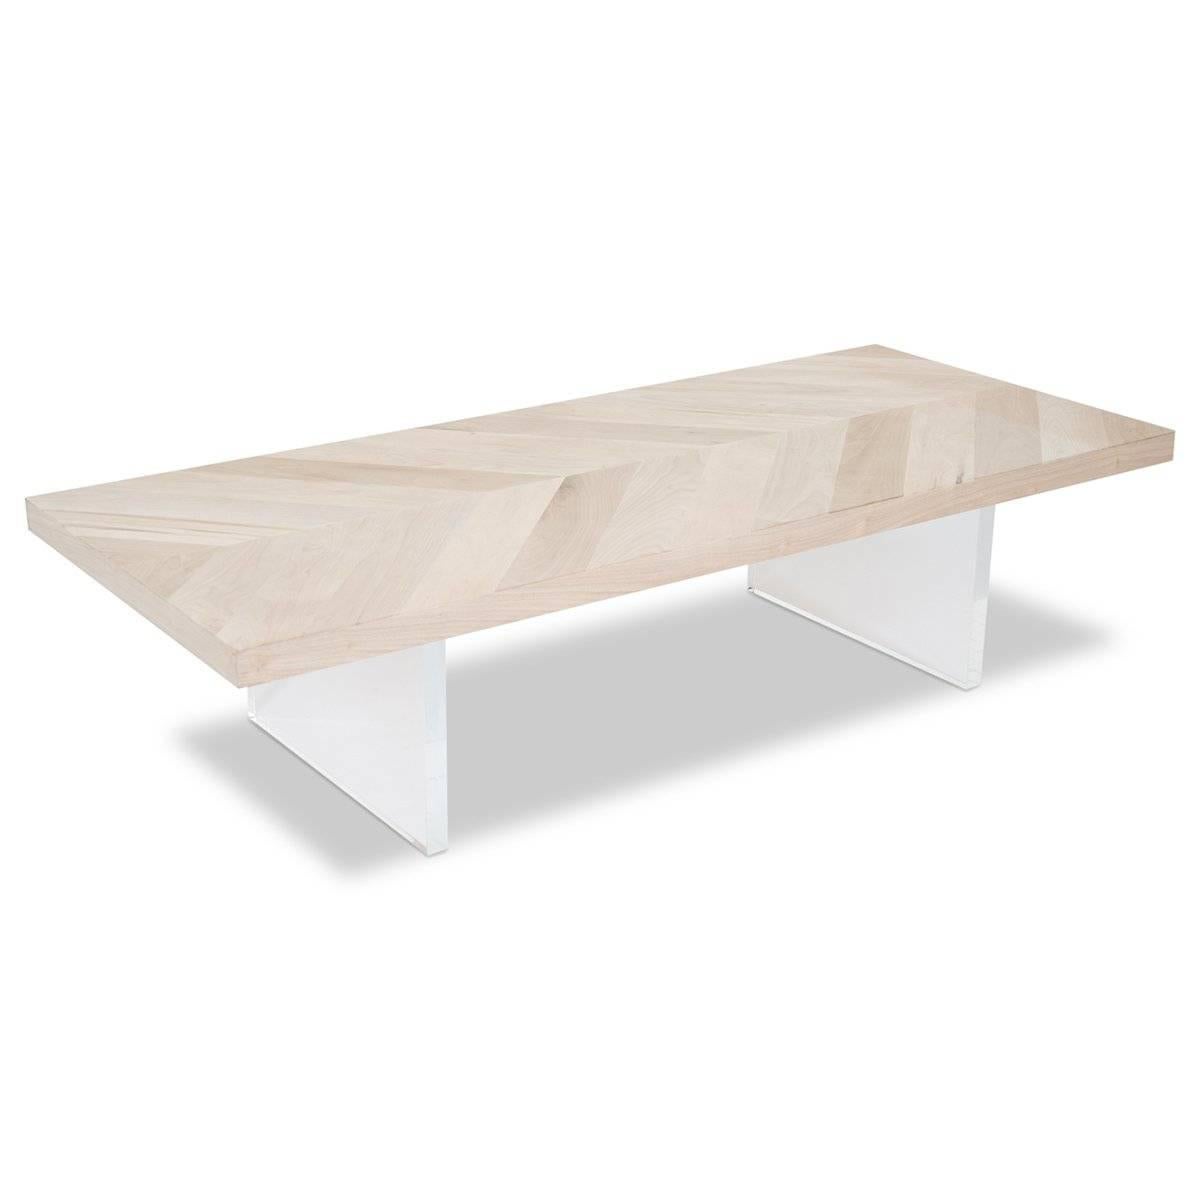 This beautifully hand-crafted coffee table is sure to impress. Featuring a beautiful bleached walnut laid out in a herringbone pattern and supported by two plinth Lucite legs.

Dimensions:
60